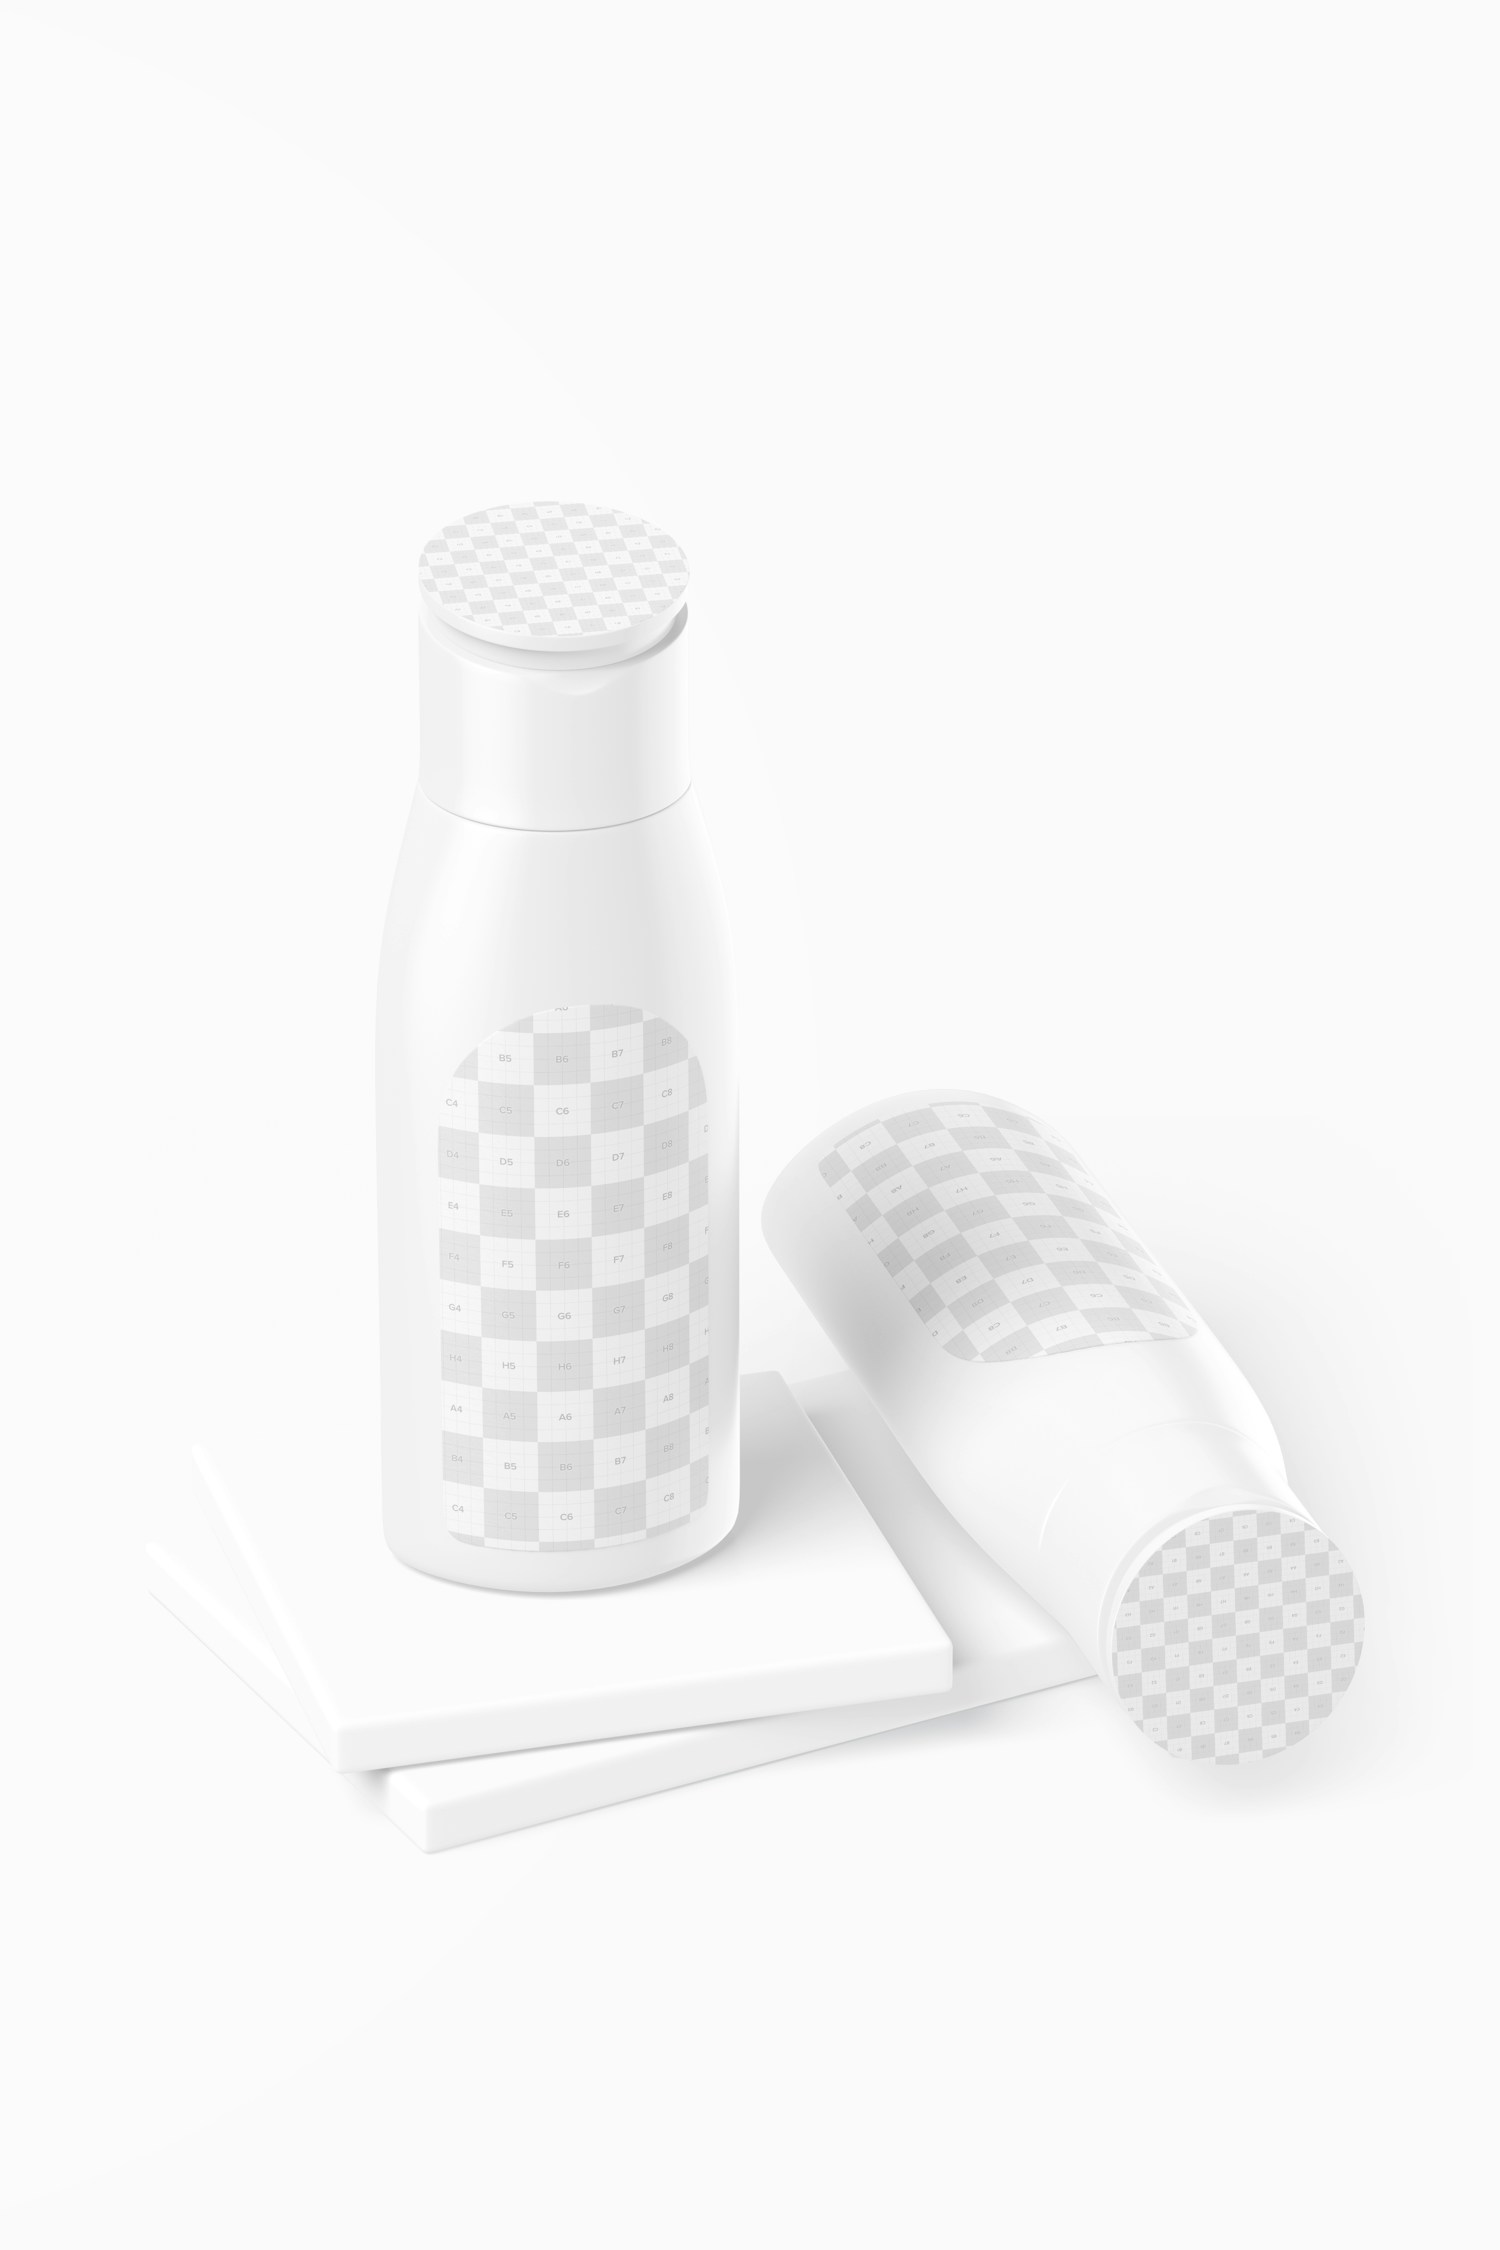 2.5 Oz Hand Lotion Bottles Mockup, Standing and Dropped